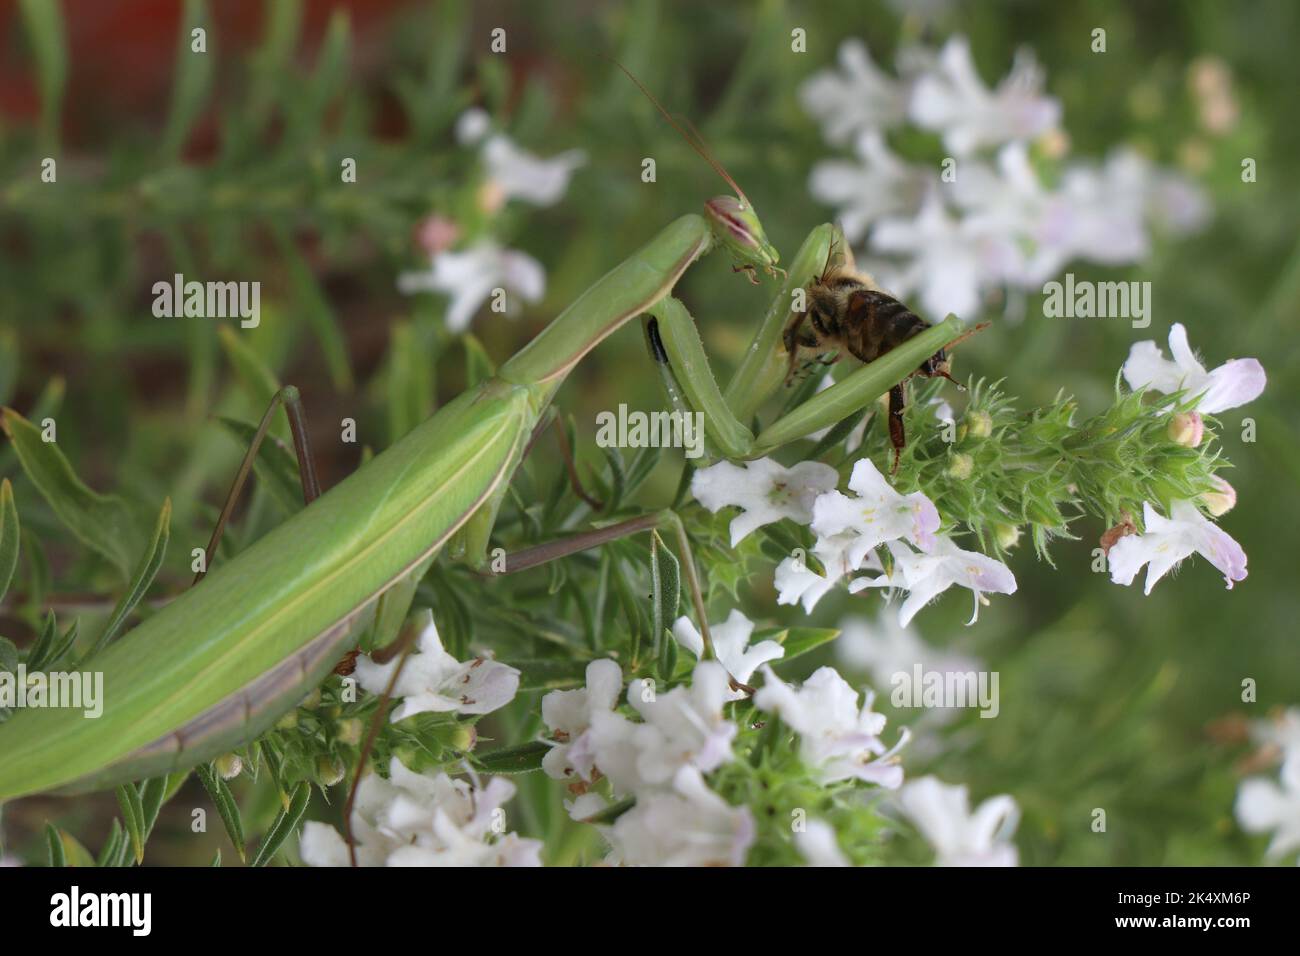 Summer meadow insect Mantodea in nature Stock Photo